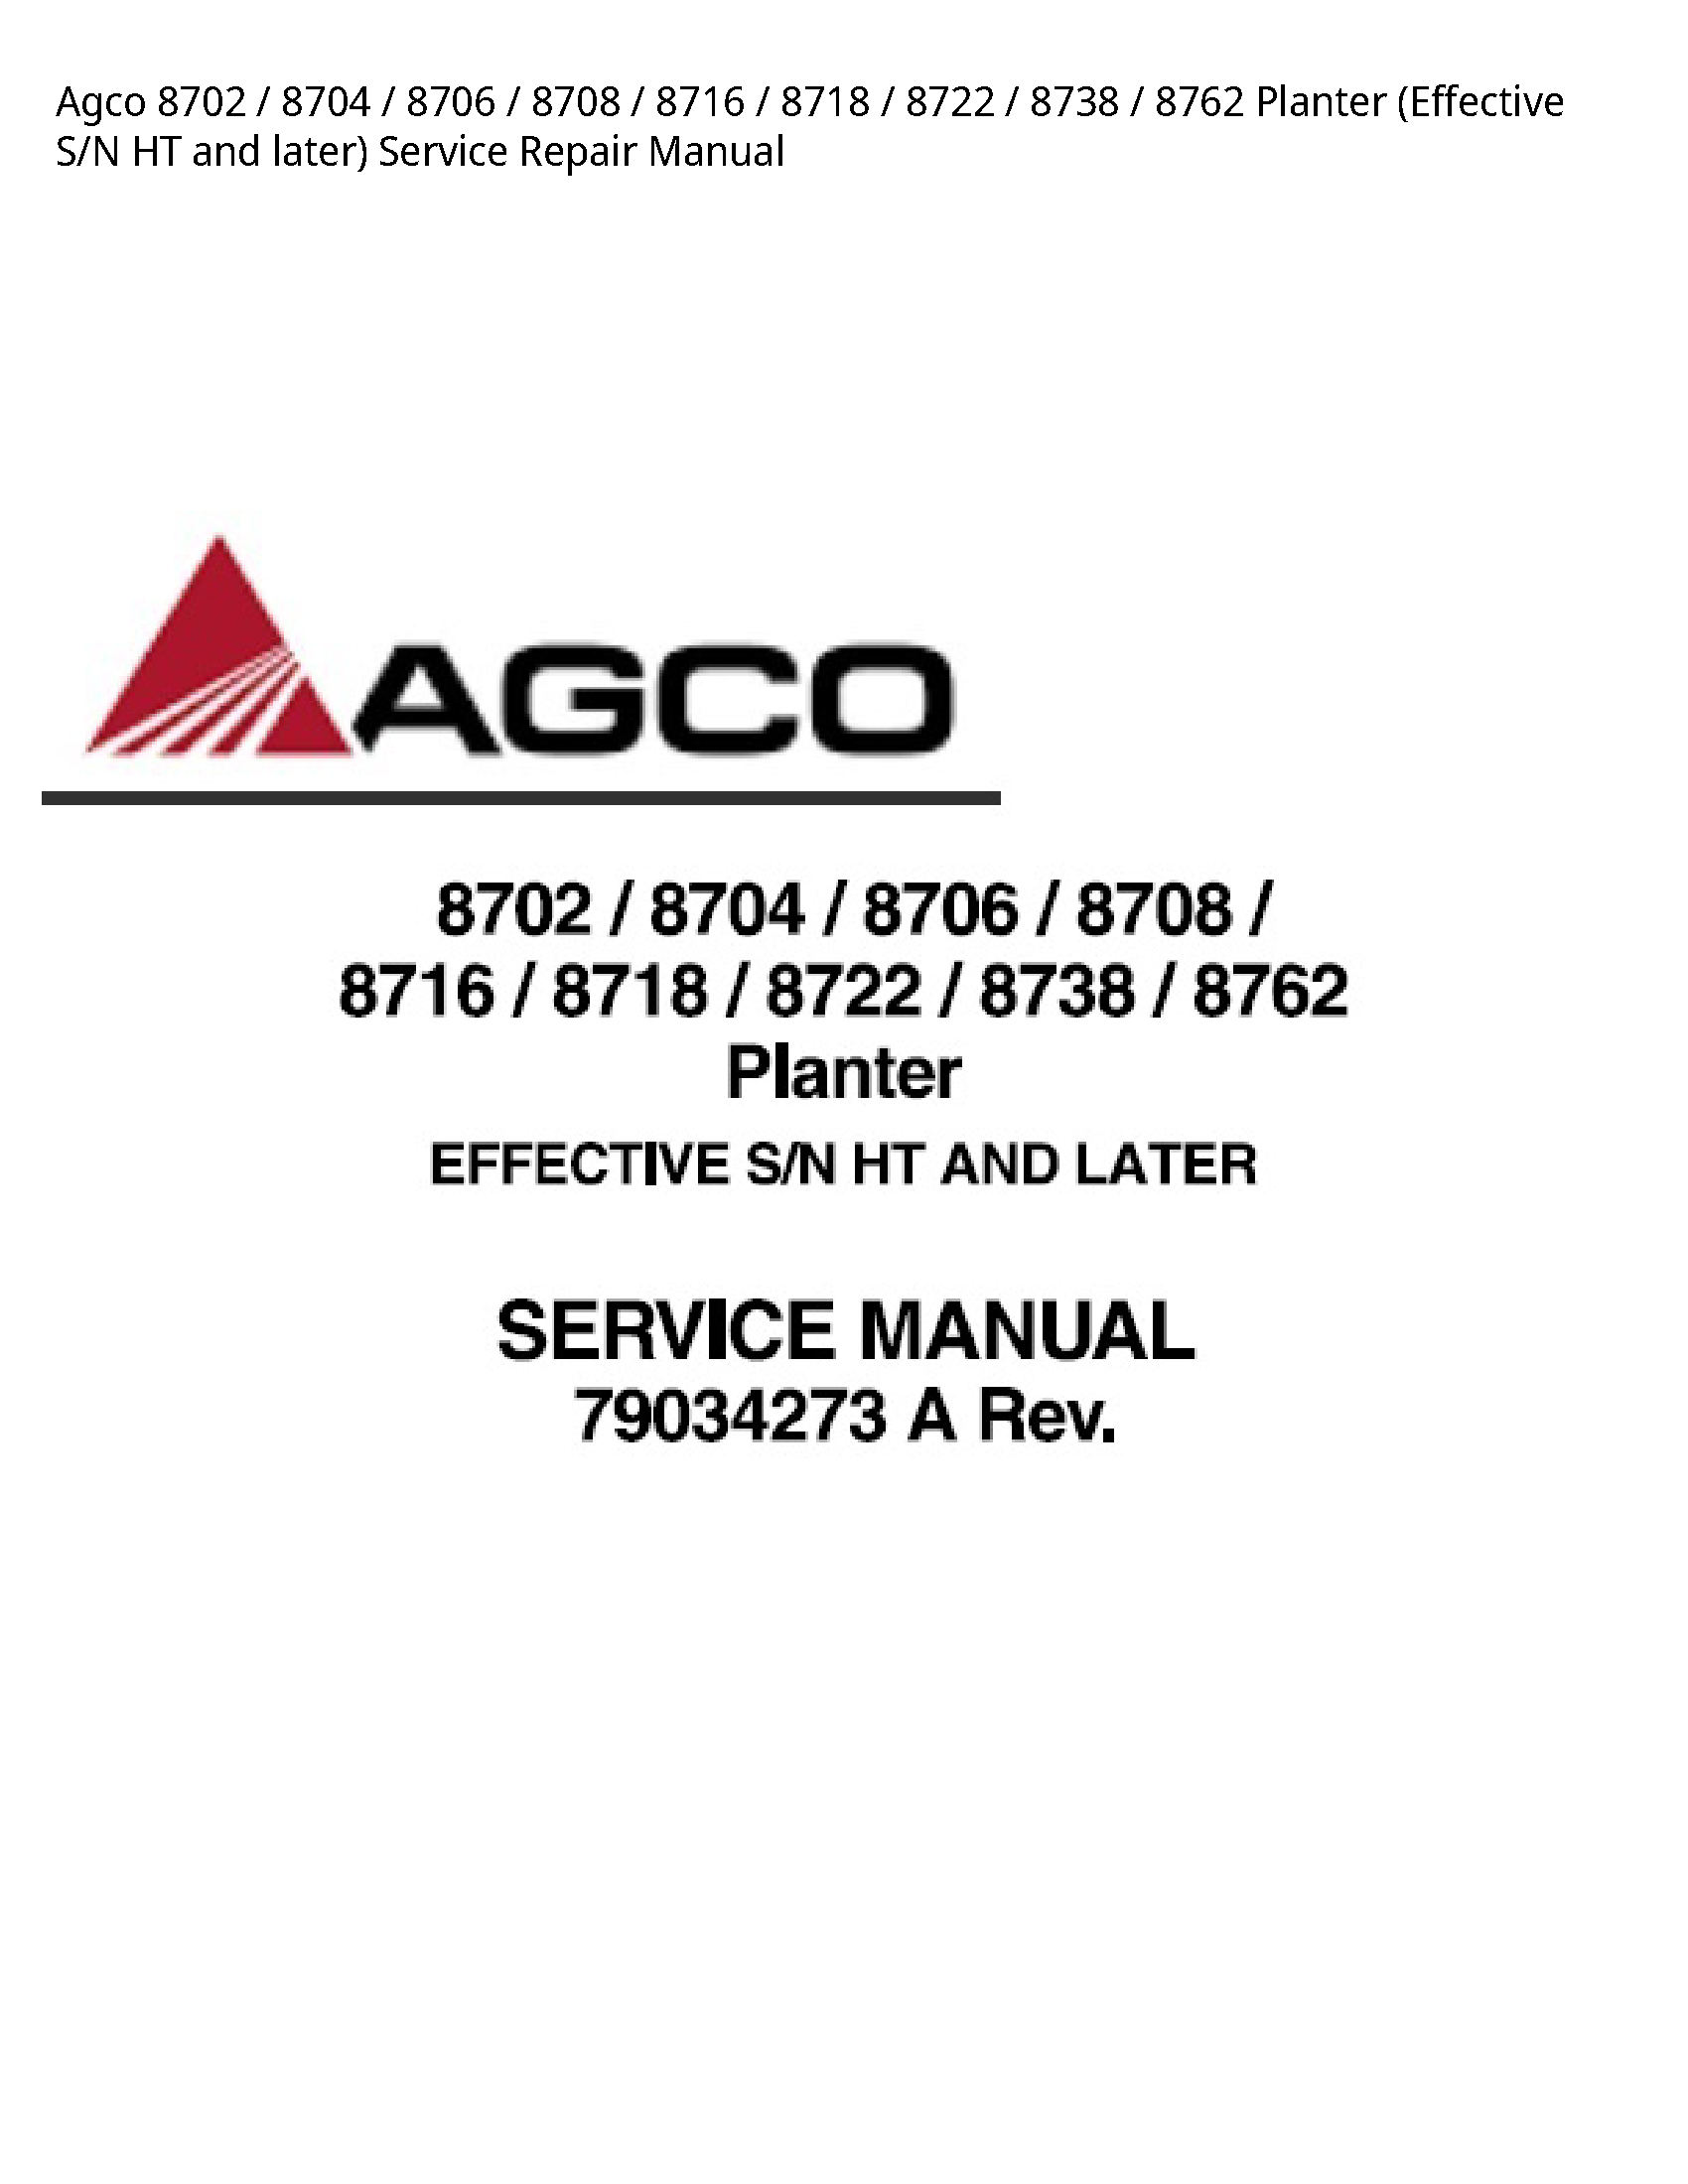 AGCO 8702 Planter (Effective S/N HT  later) manual